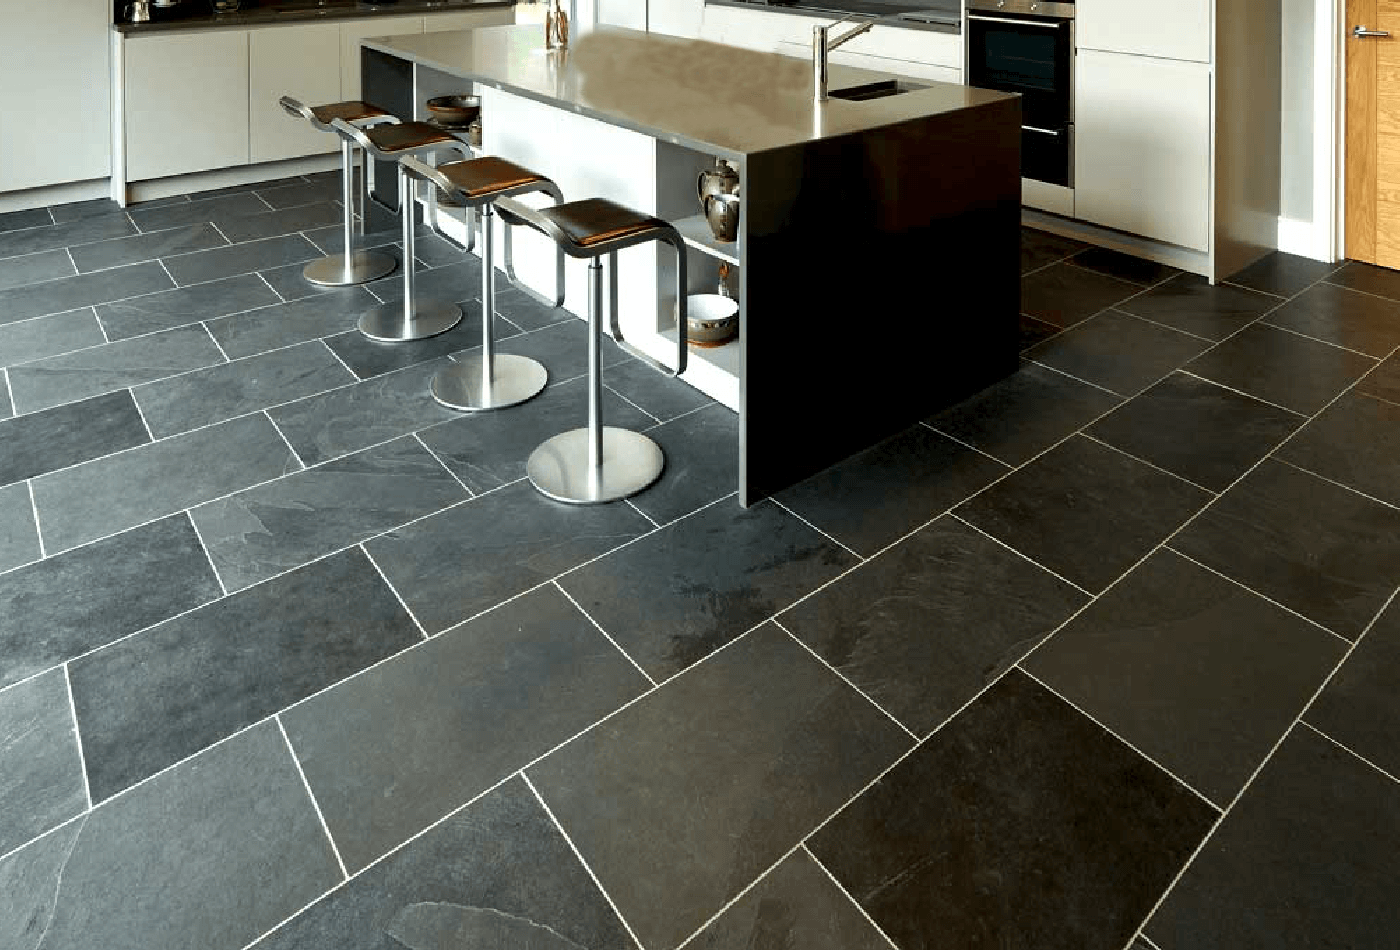 Slate Floors out of style